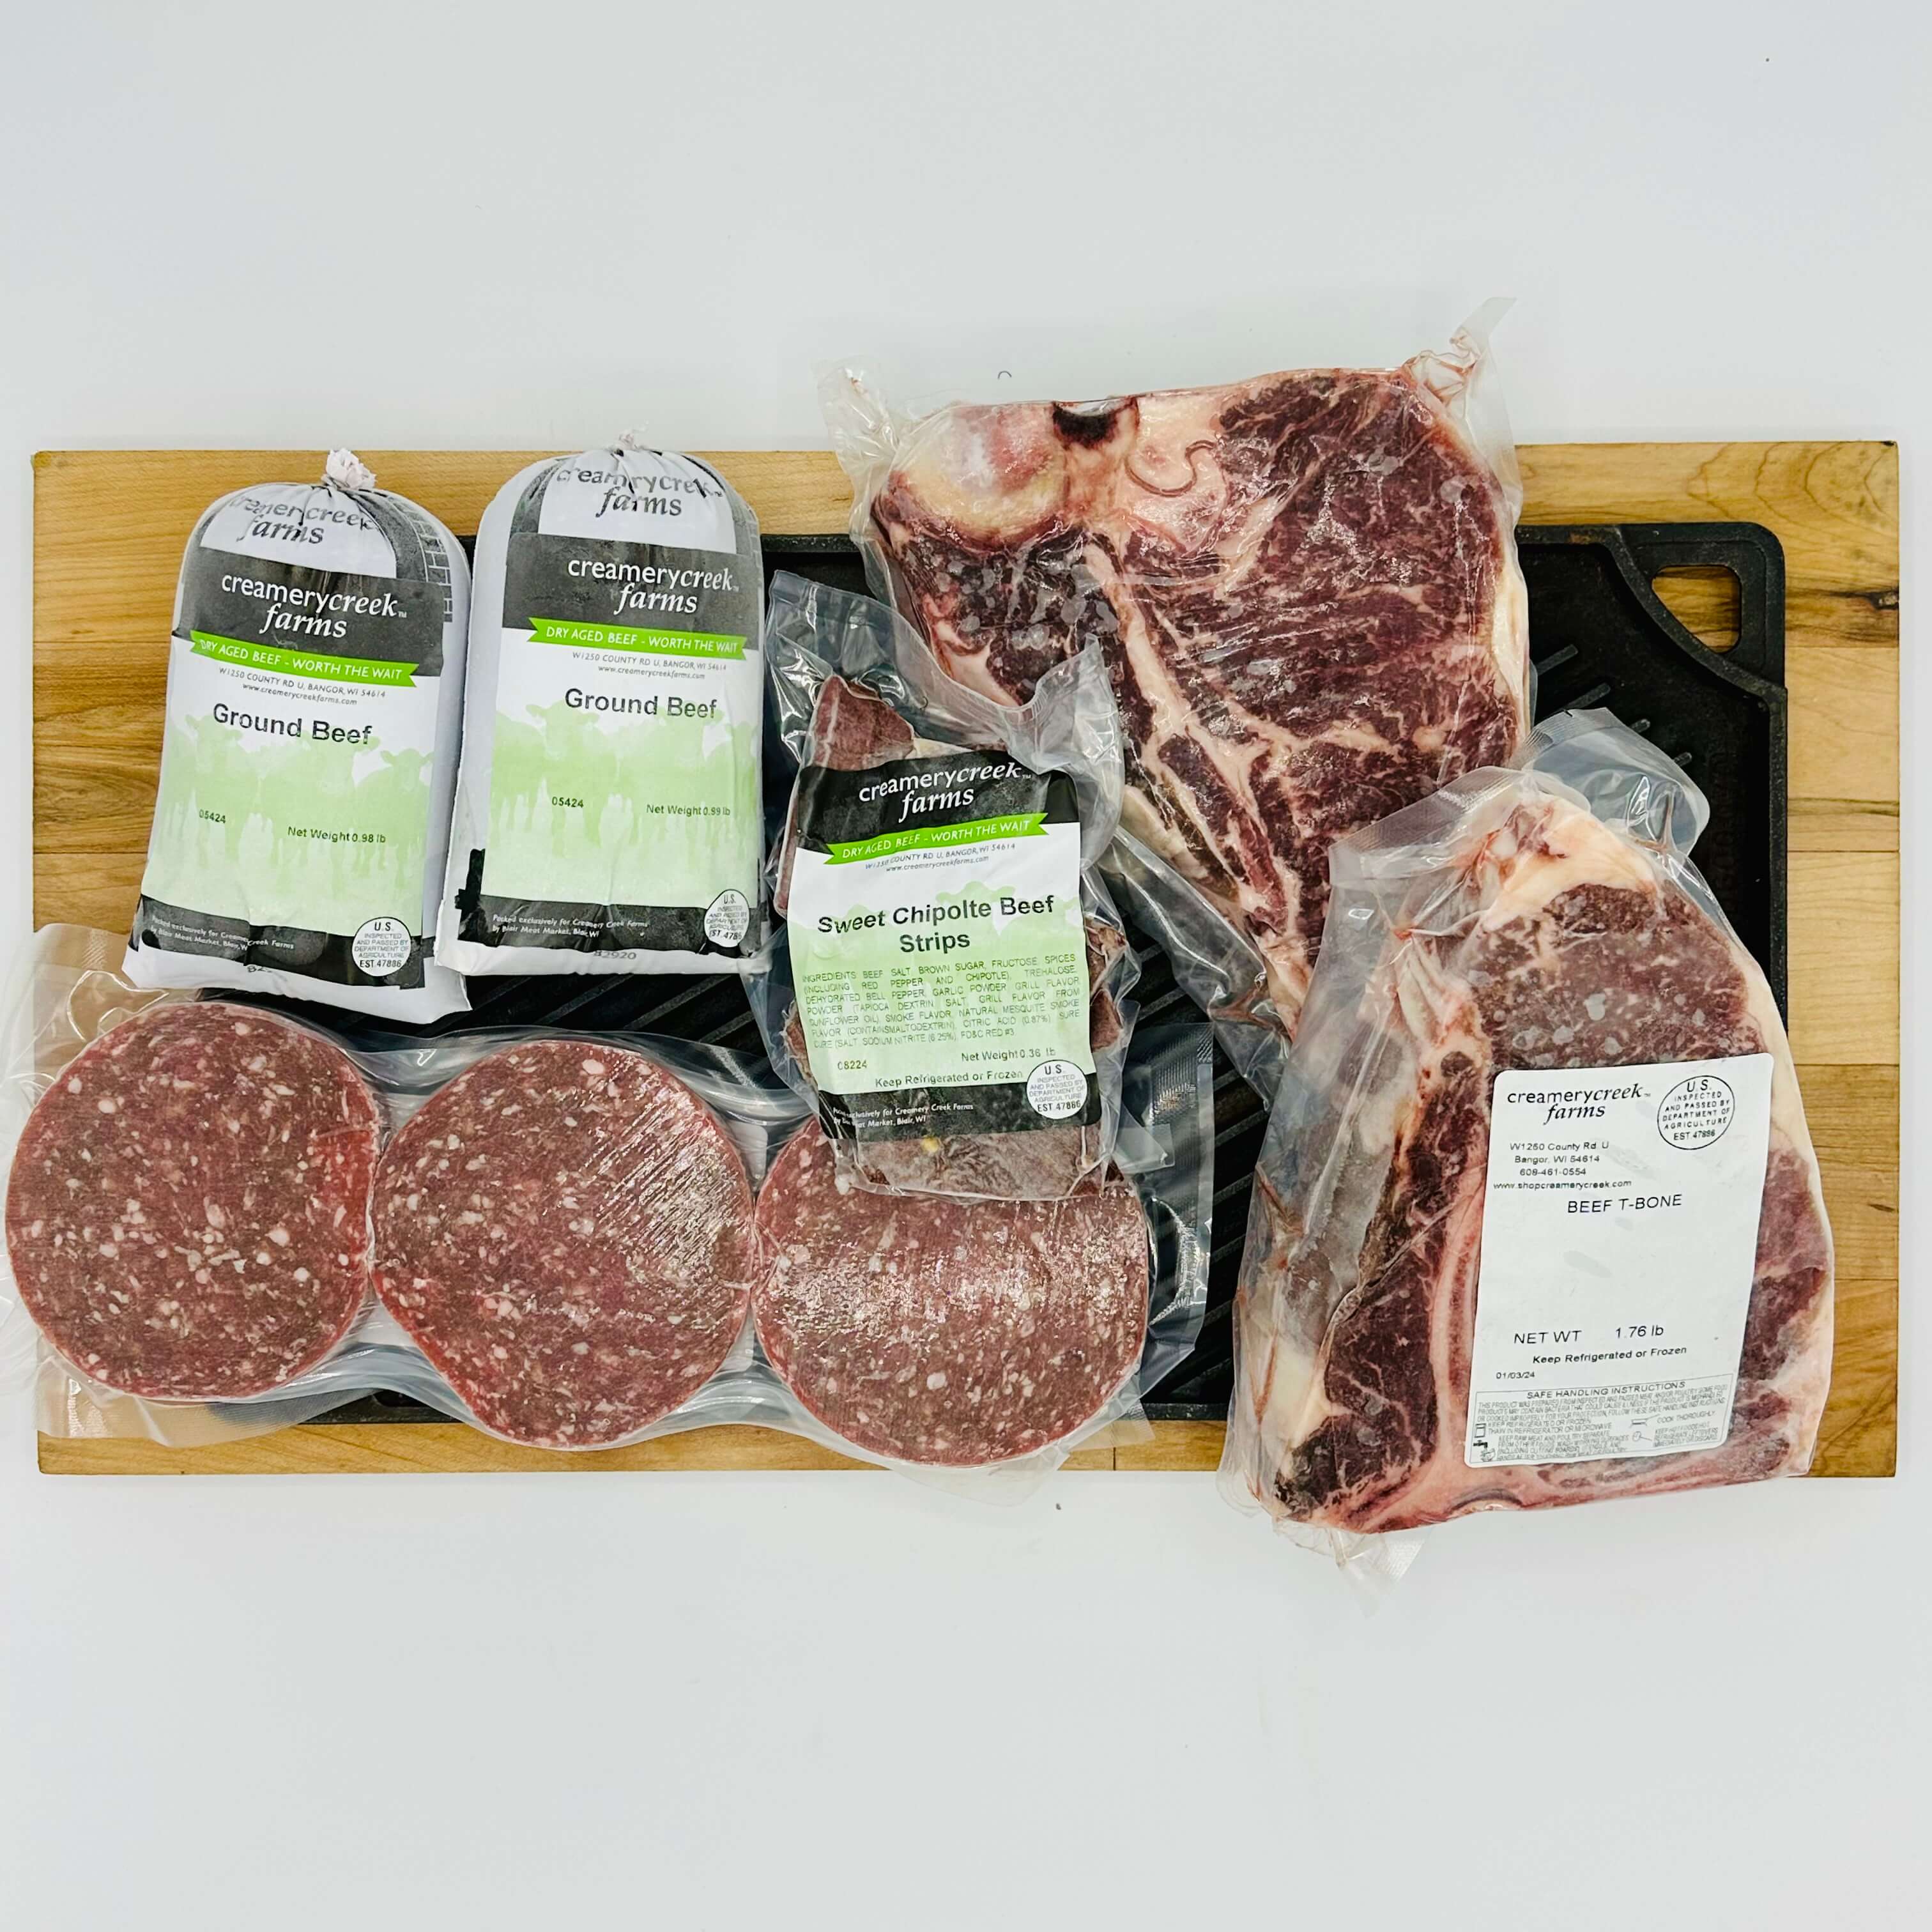 Dry Aged Beef - April Sampler Special - Box of the Month - Creamery Creek Farms